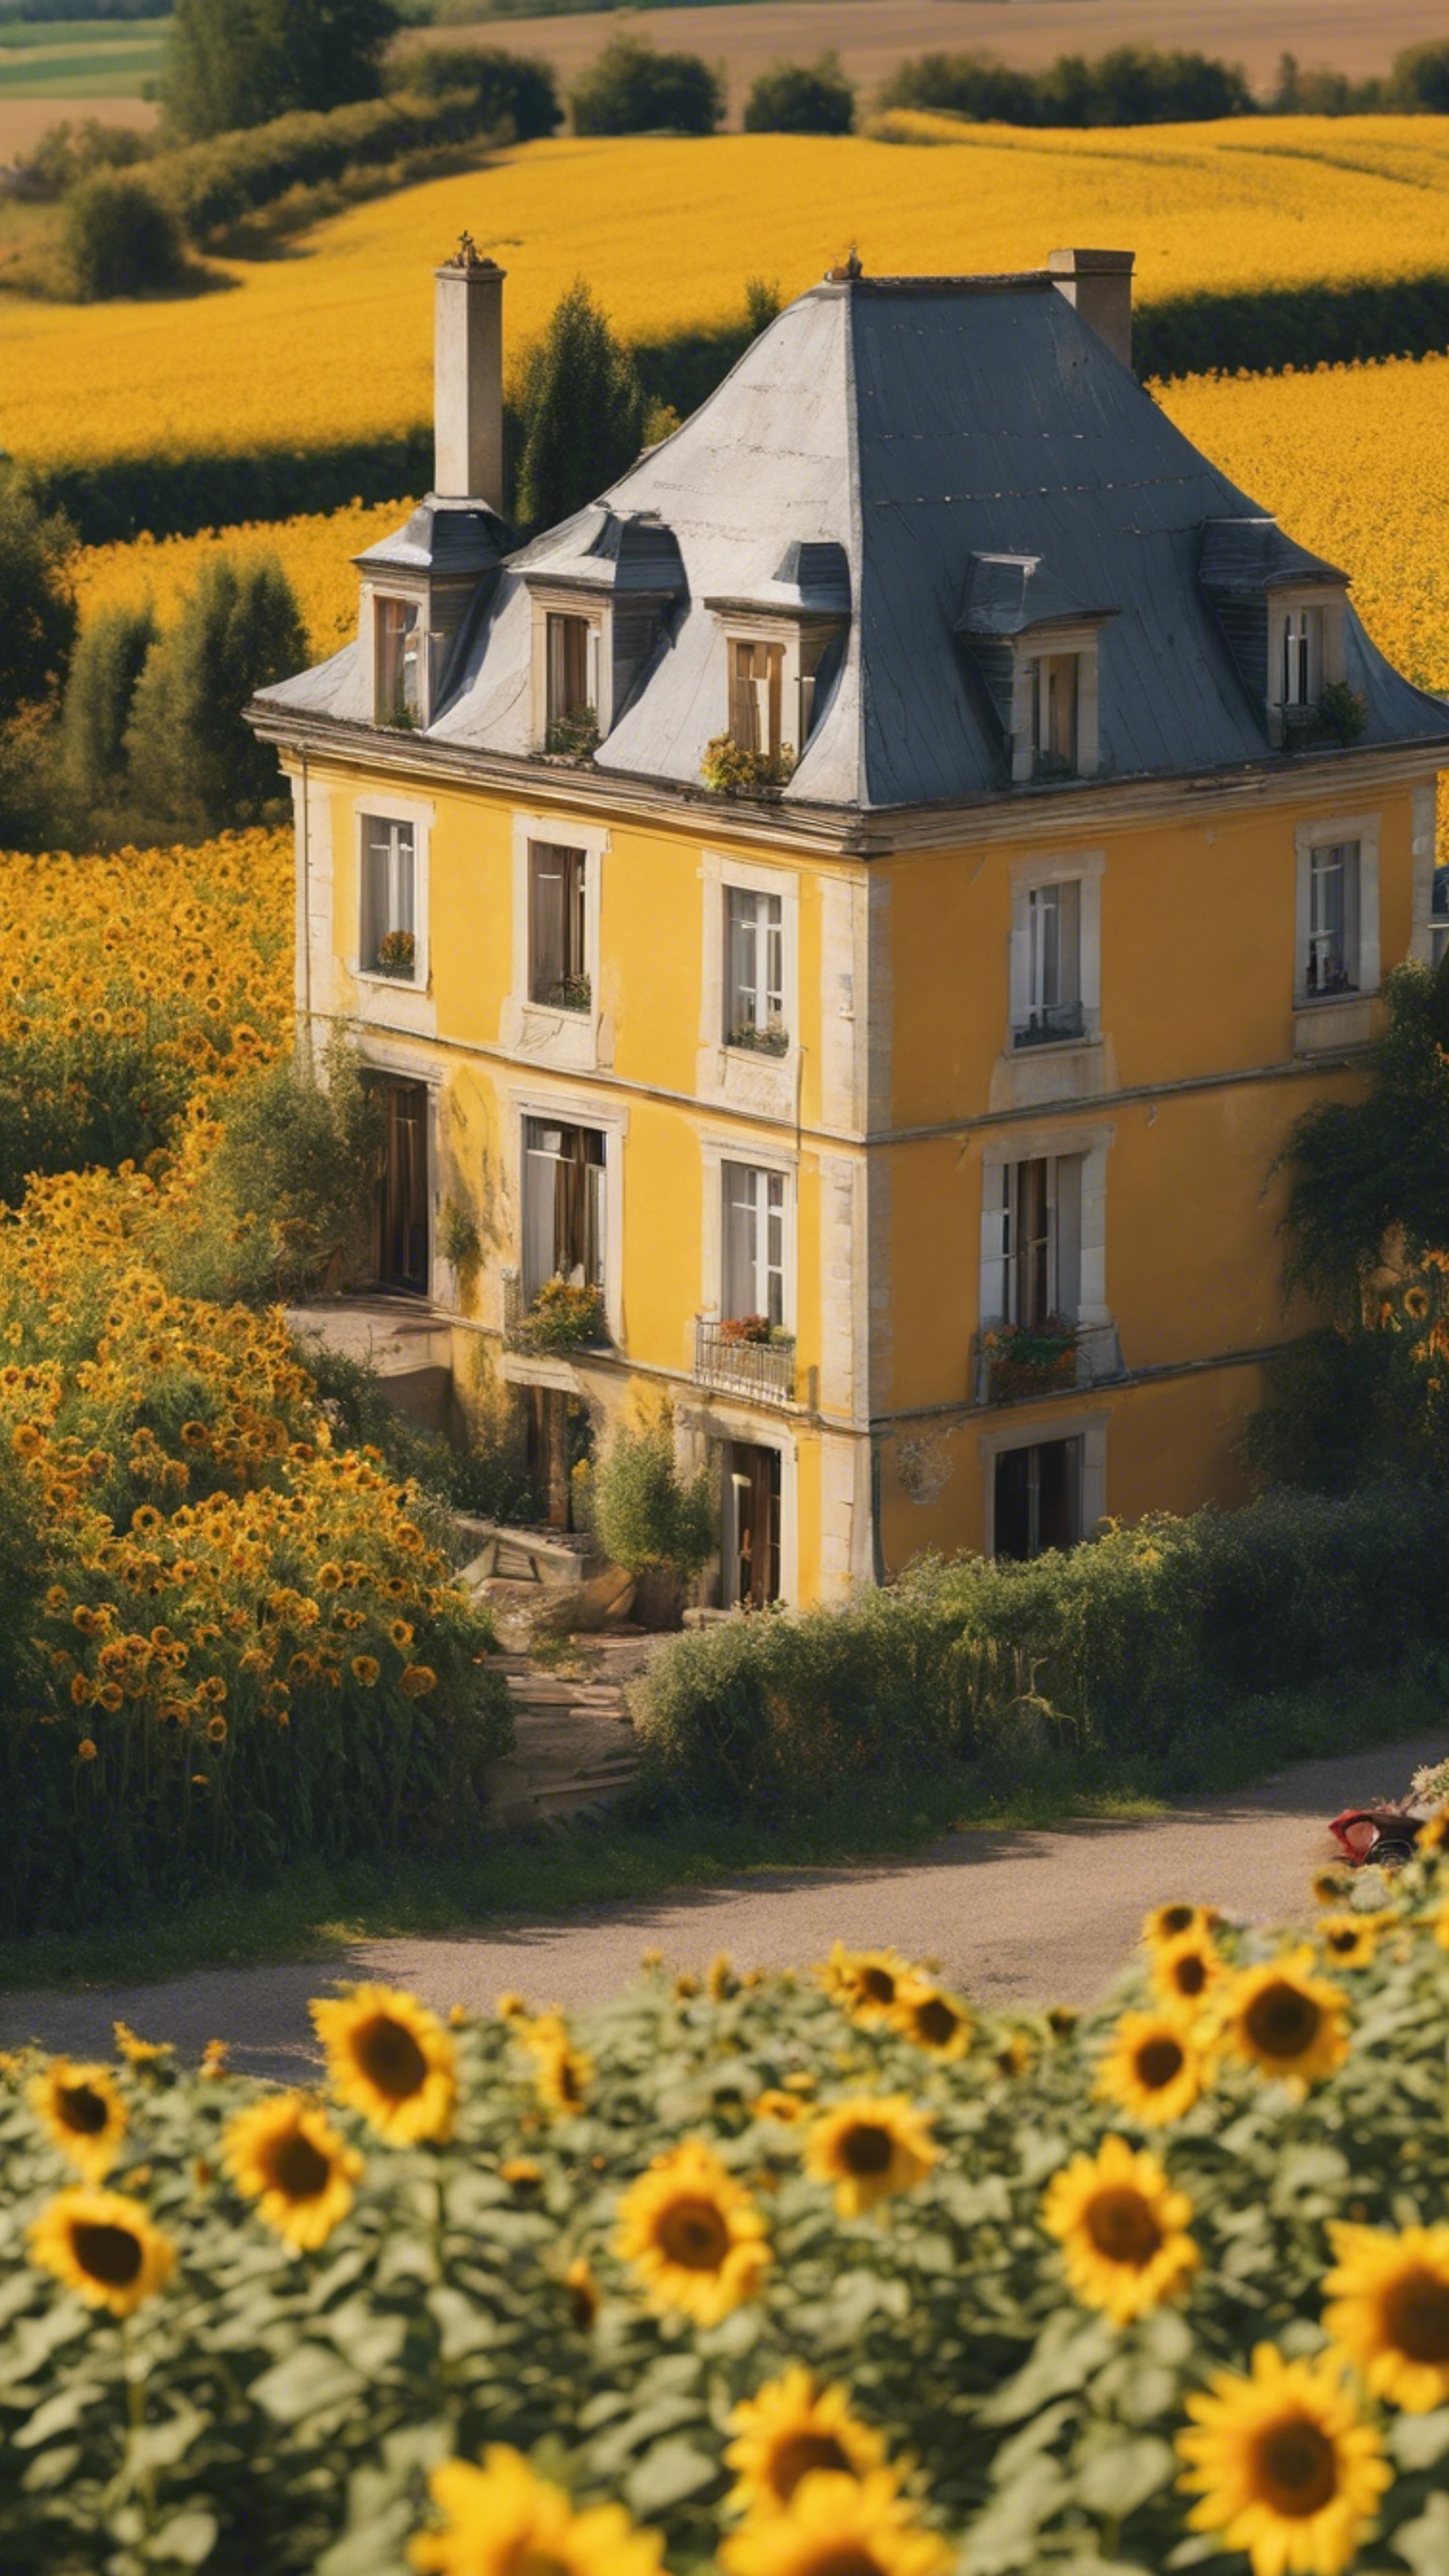 A quaint French country house nestled in a field of bright yellow sunflowers during a sunny afternoon. Papel de parede[7540a515ea0143d58f51]